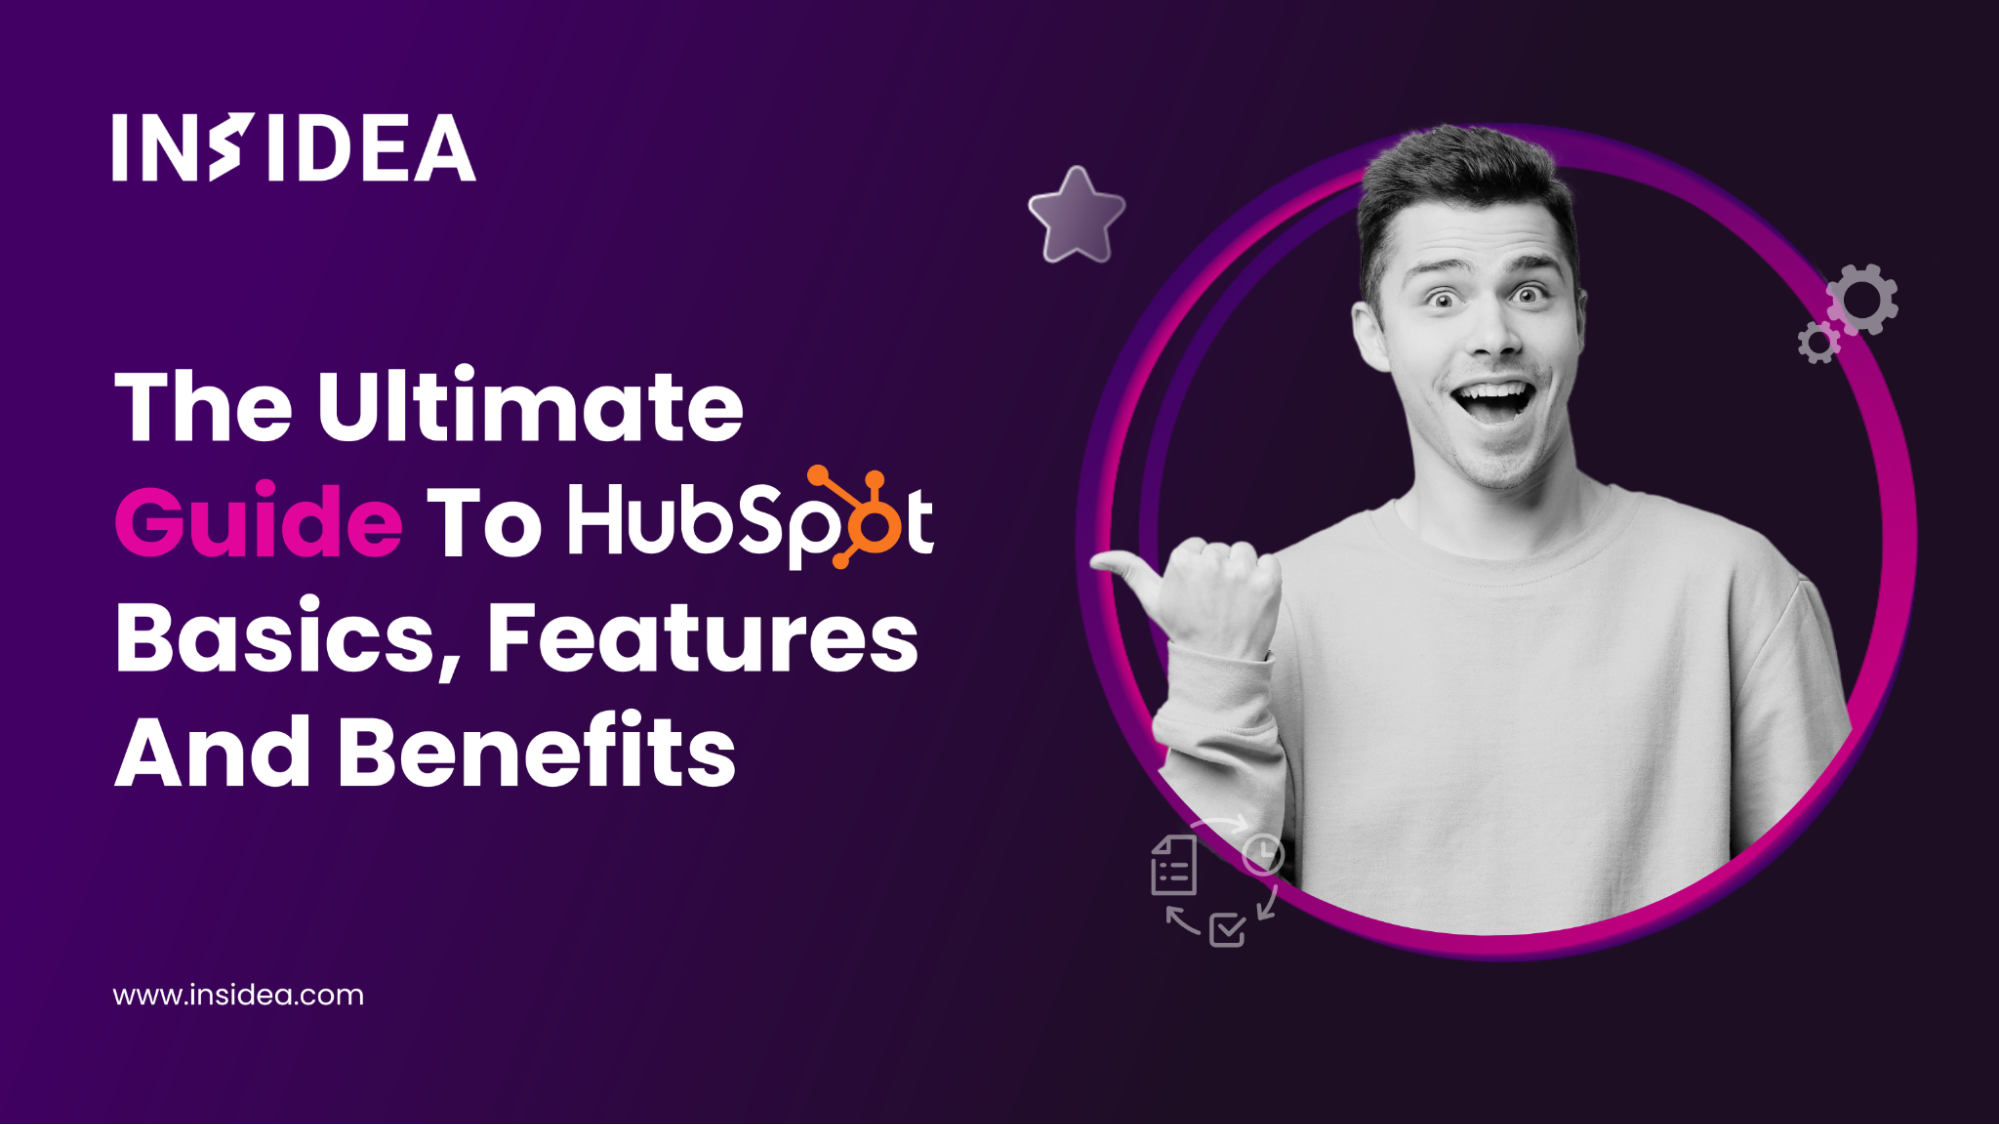 The ultimate guide to HubSpot